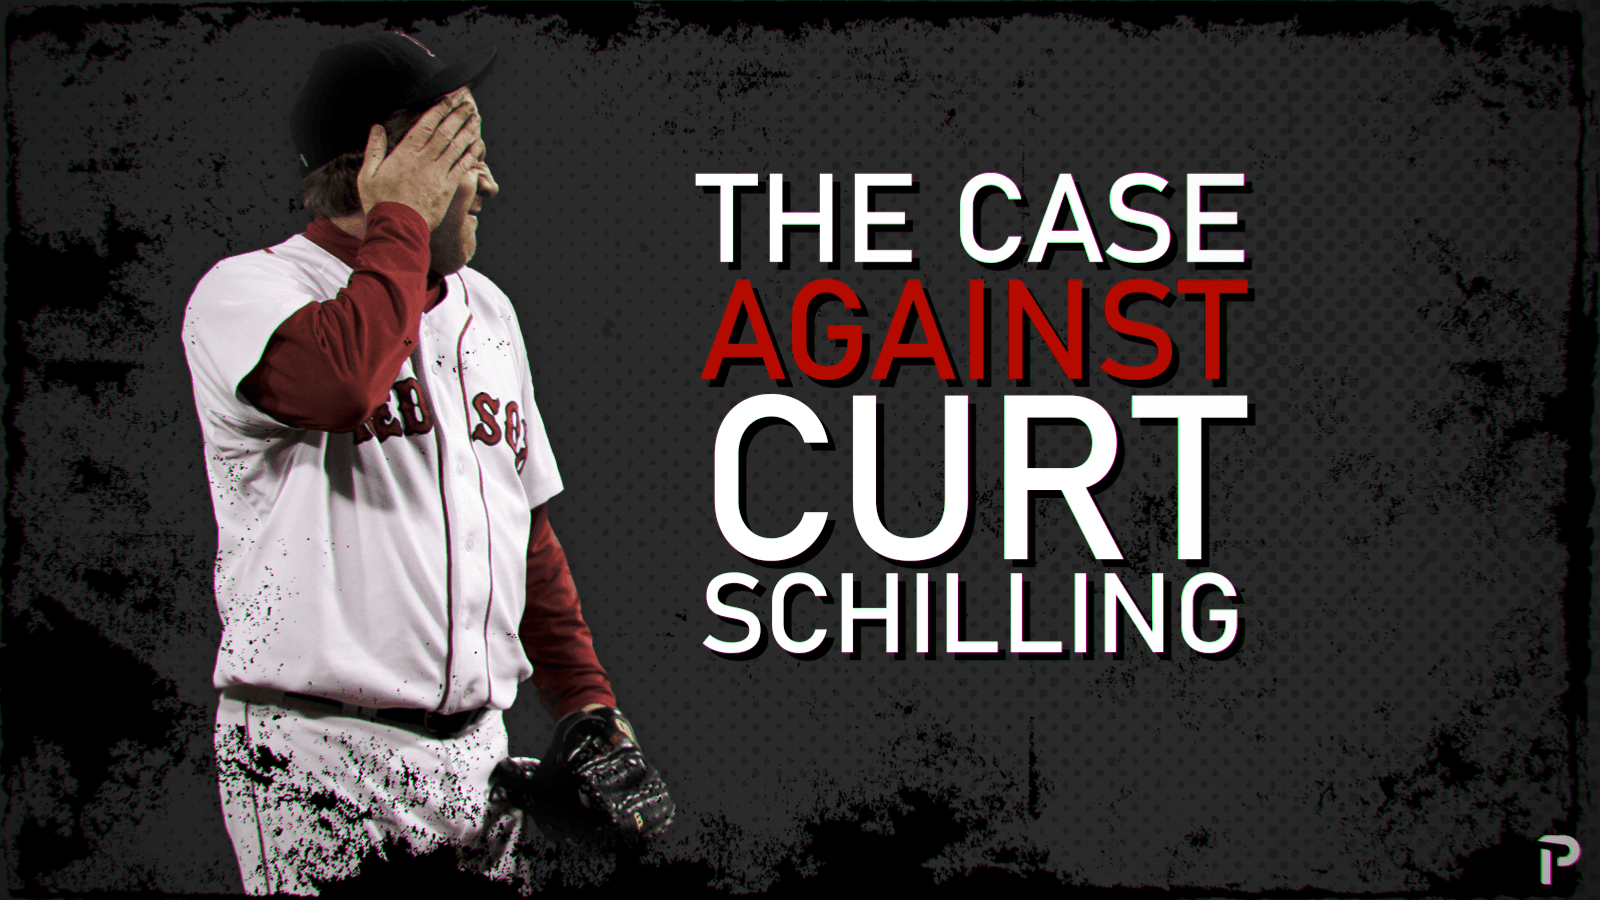 Curt Schilling, ESPN Analyst, Is Fired Over Offensive Social Media Post -  The New York Times